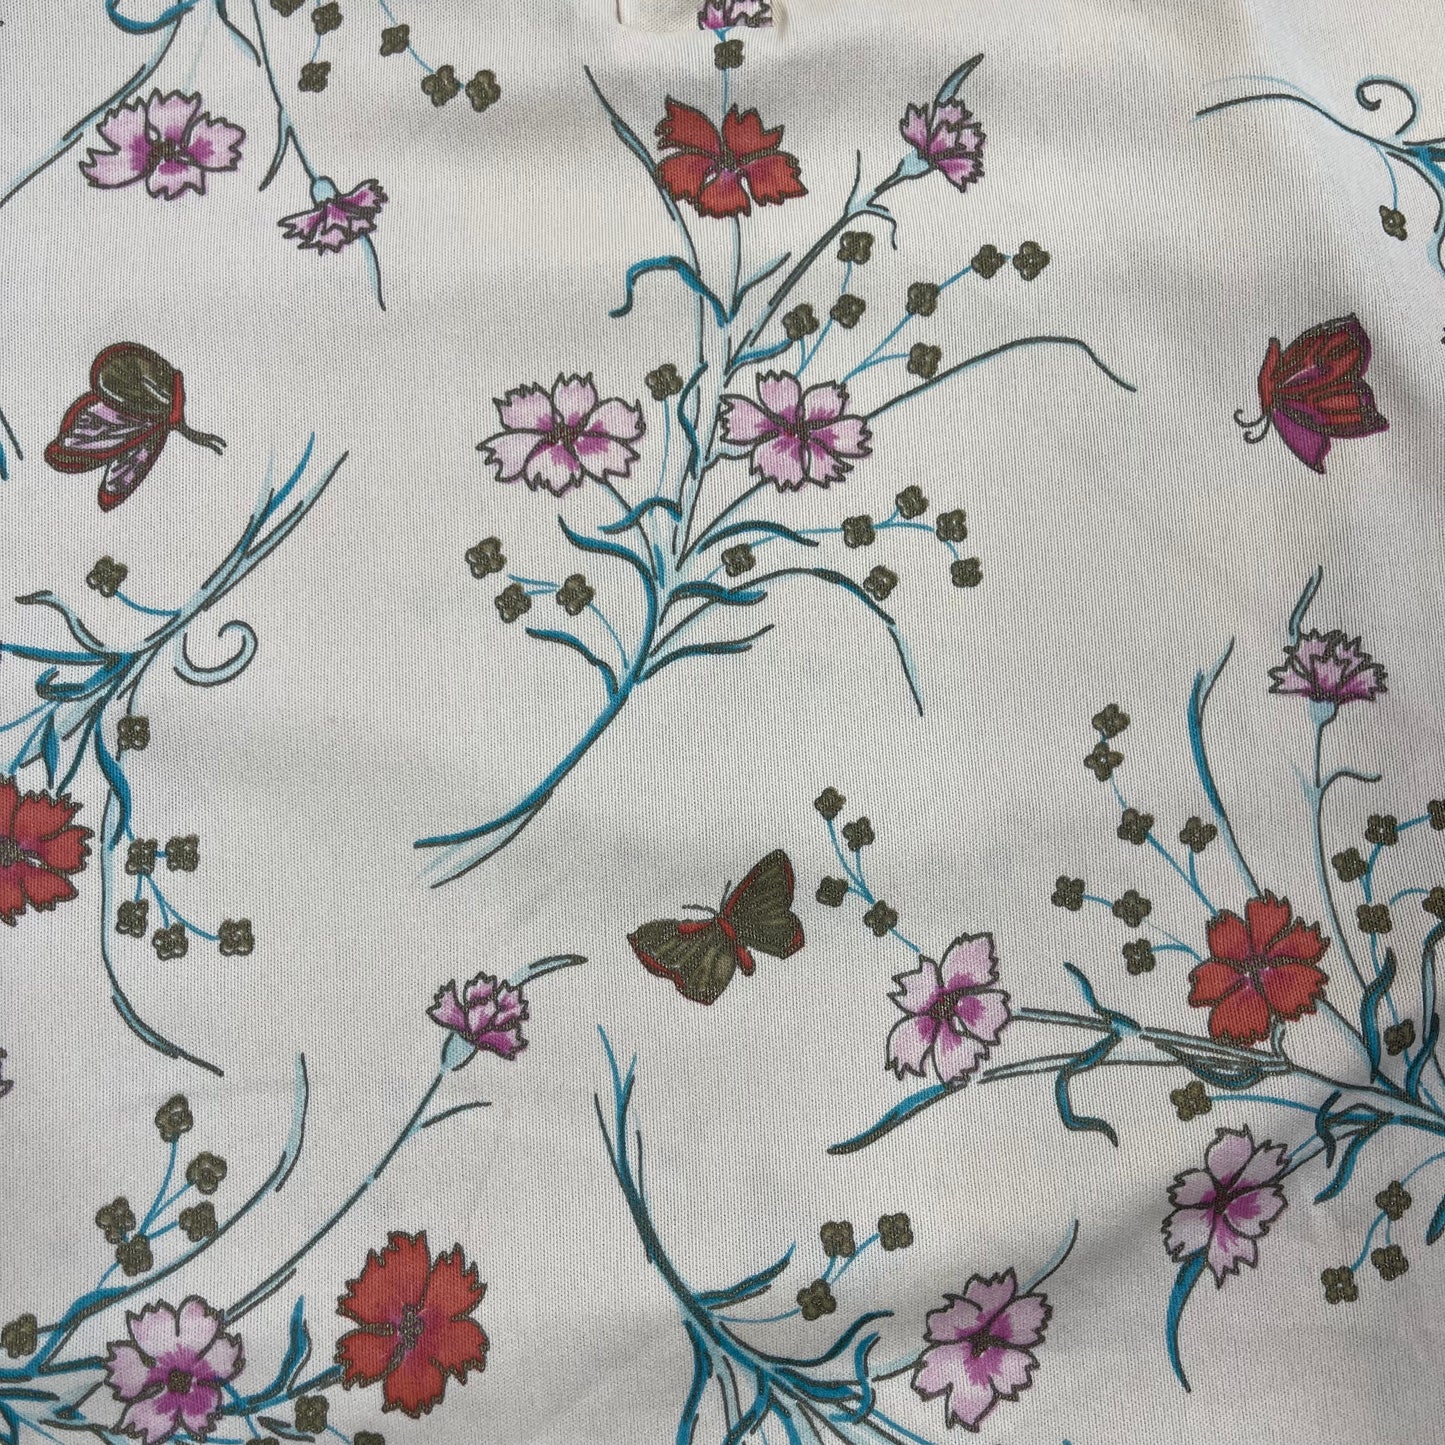 VINTAGE 70’S FLORAL BUTTERFLY GARDEN TOP